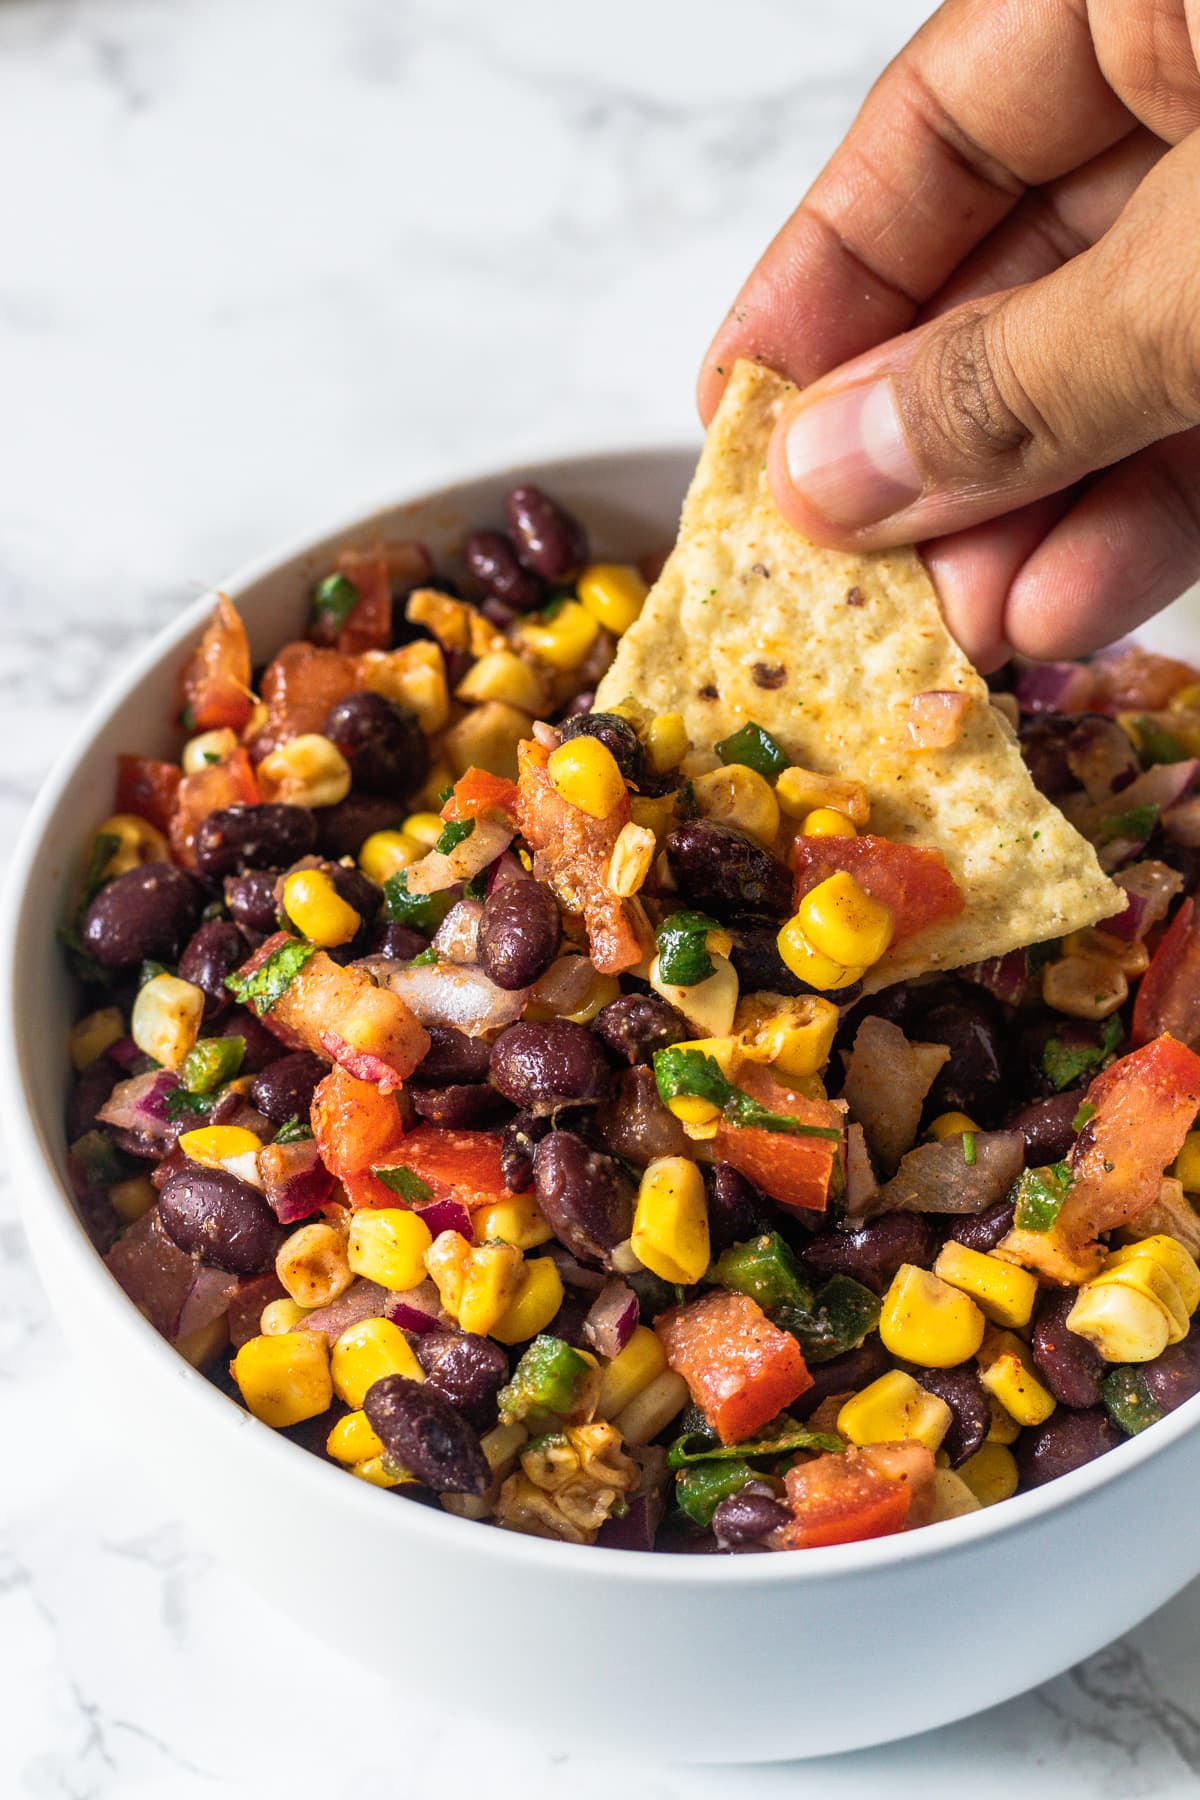 Taking a scoop of black bean and corn salsa using tortilla chip.